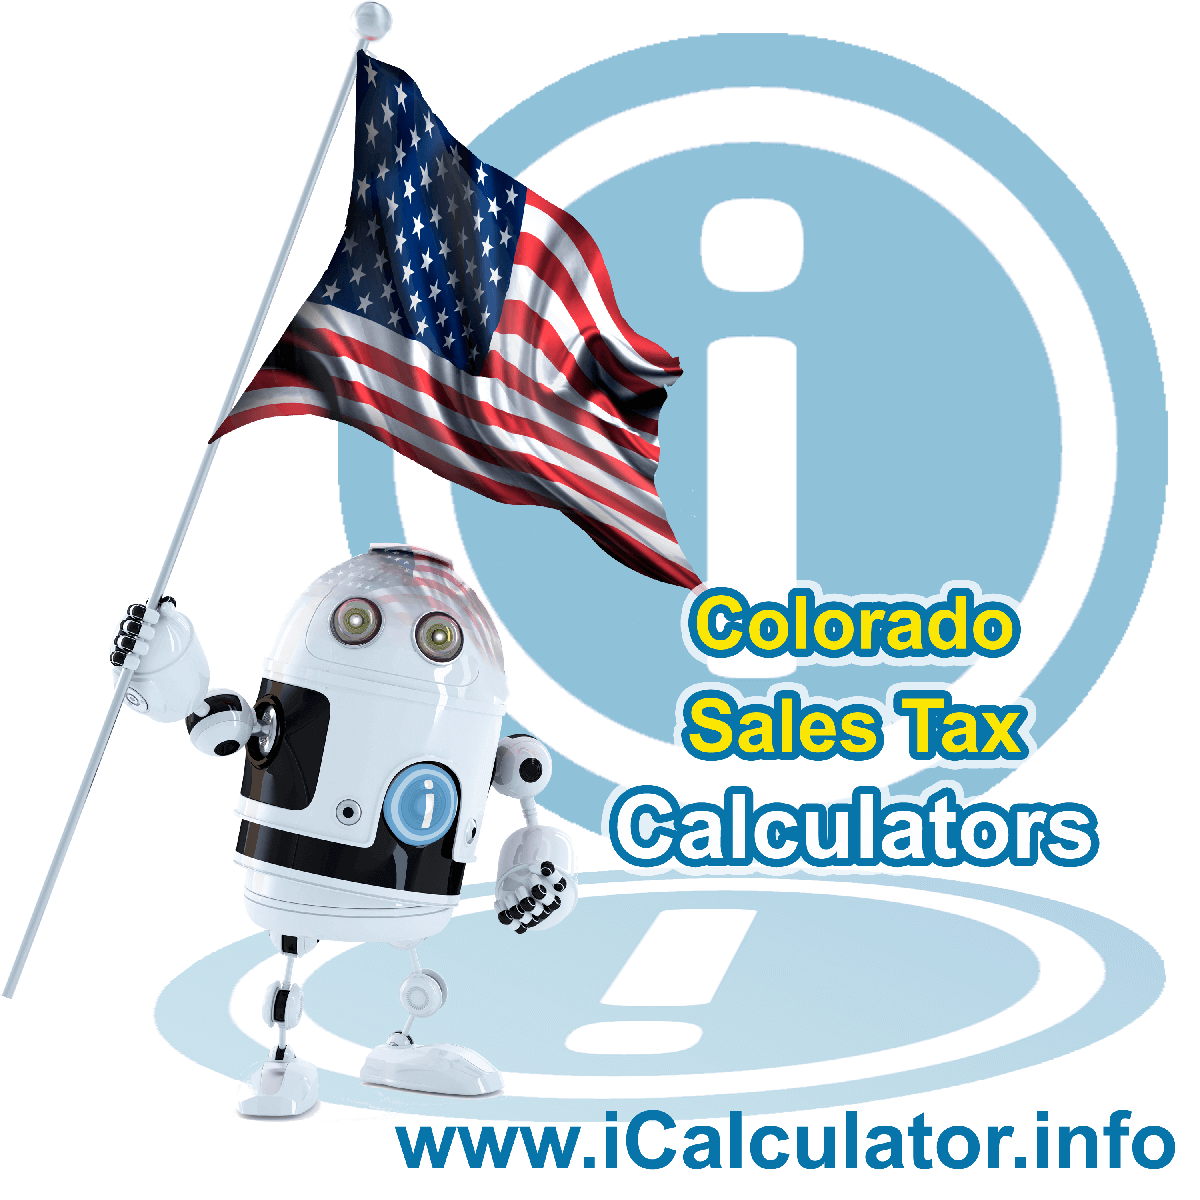 Pierce Sales Rates: This image illustrates a calculator robot calculating Pierce sales tax manually using the Pierce Sales Tax Formula. You can use this information to calculate Pierce Sales Tax manually or use the Pierce Sales Tax Calculator to calculate sales tax online.